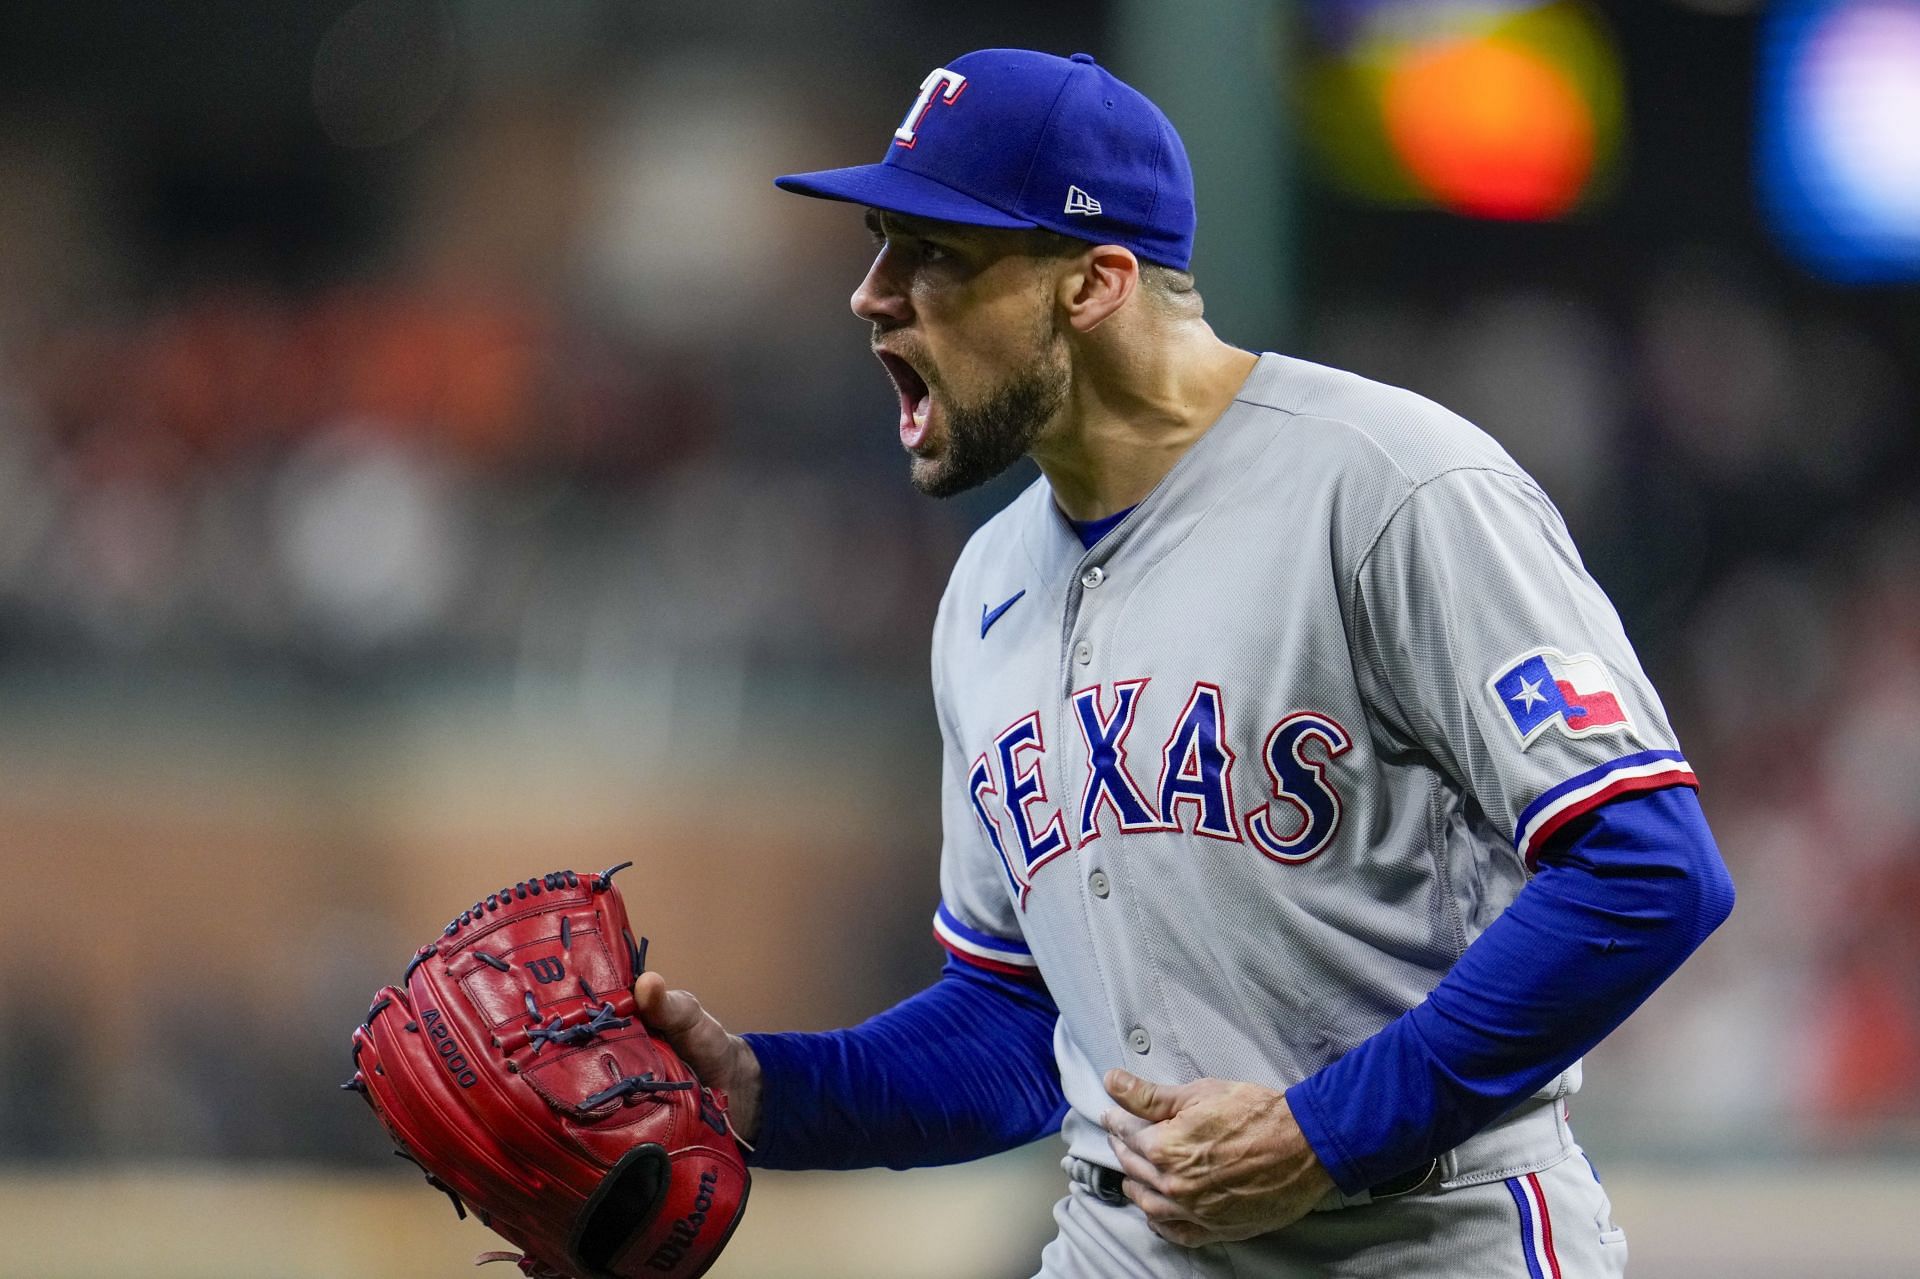 Eovaldi&rsquo;s stellar fifth inning was crucial to help the Rangers extend their ALCS lead to 2-0.